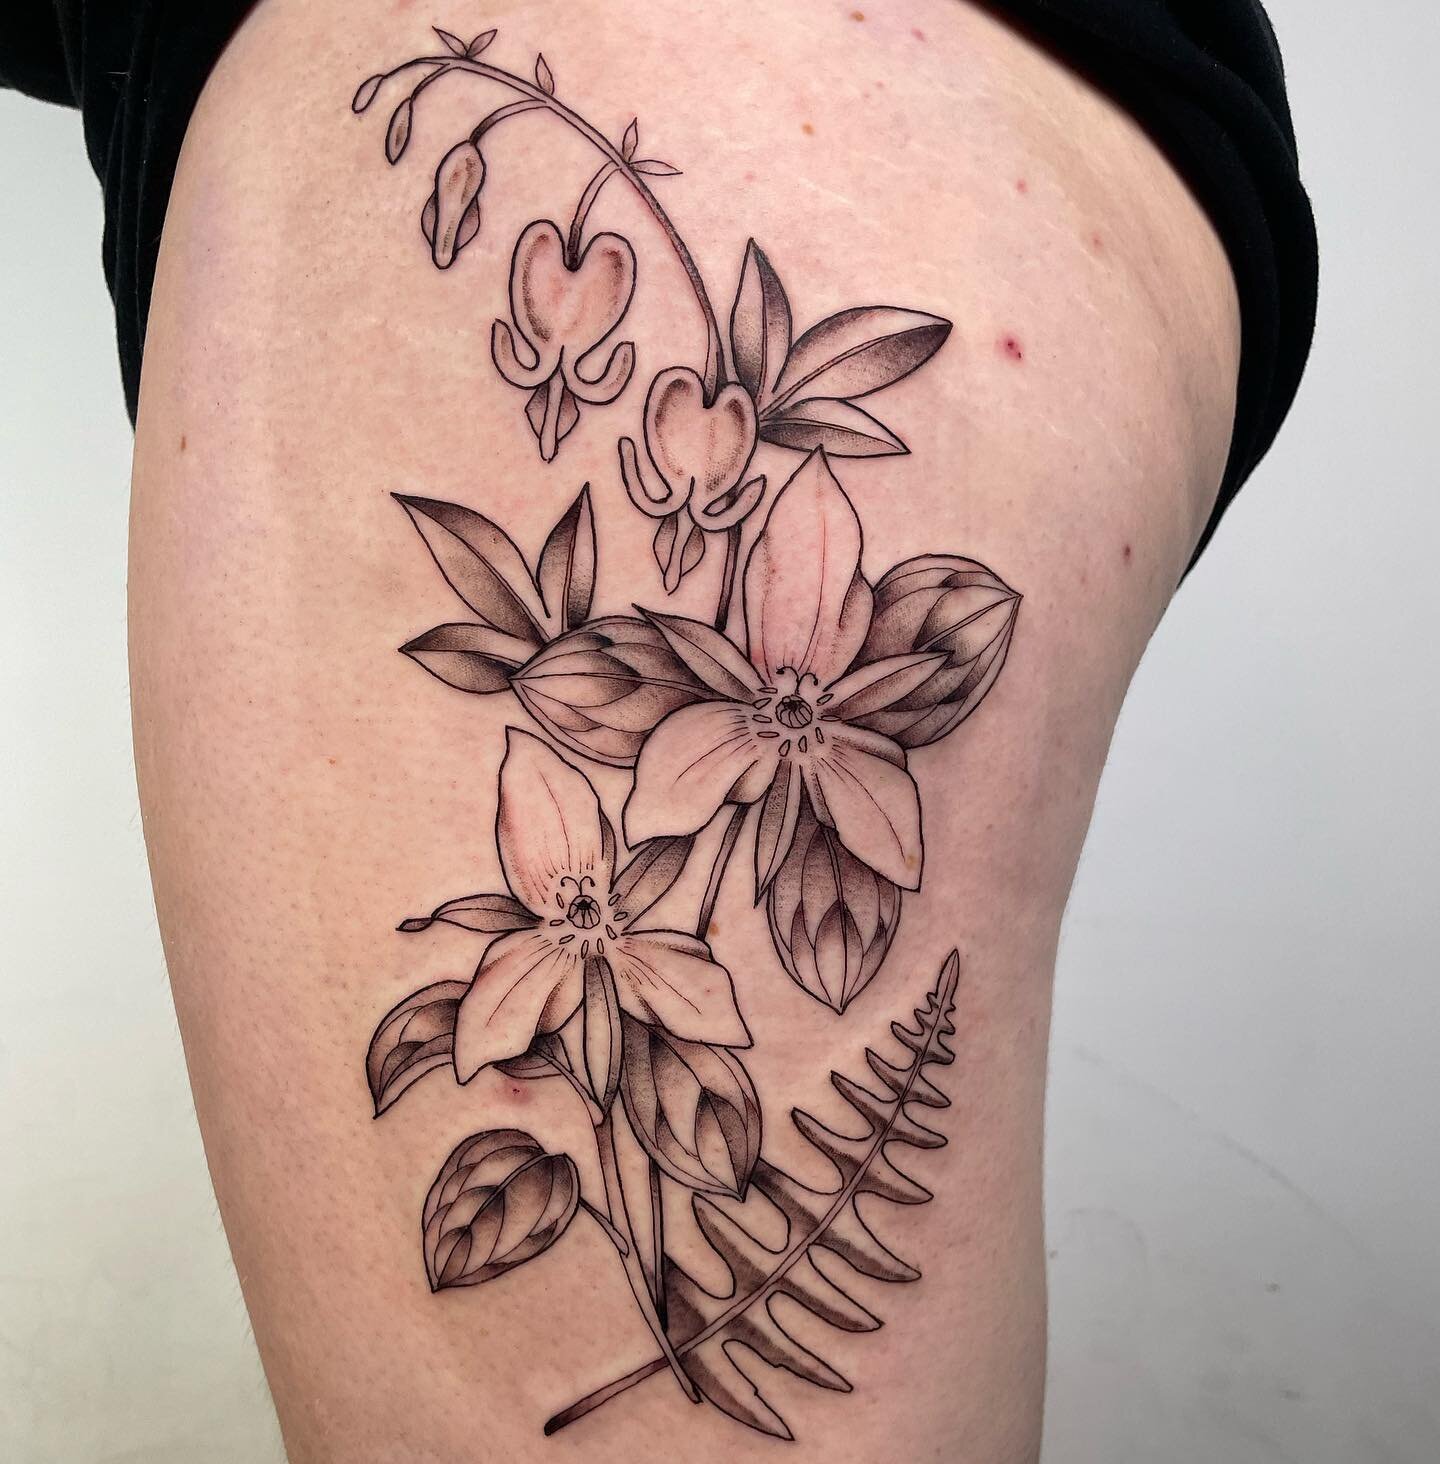 Thank you Bethany! getting excited for your guys&rsquo; tattoos to start poking out of shorts and shirts, it&rsquo;s the cutest time of the year. 🌞
.
.
.
.
.
.
.
.
.
#eugenetattoo #eugeneoregon #eugene #oregon #oregontattoo #pnw #pnwtattoo #trillium